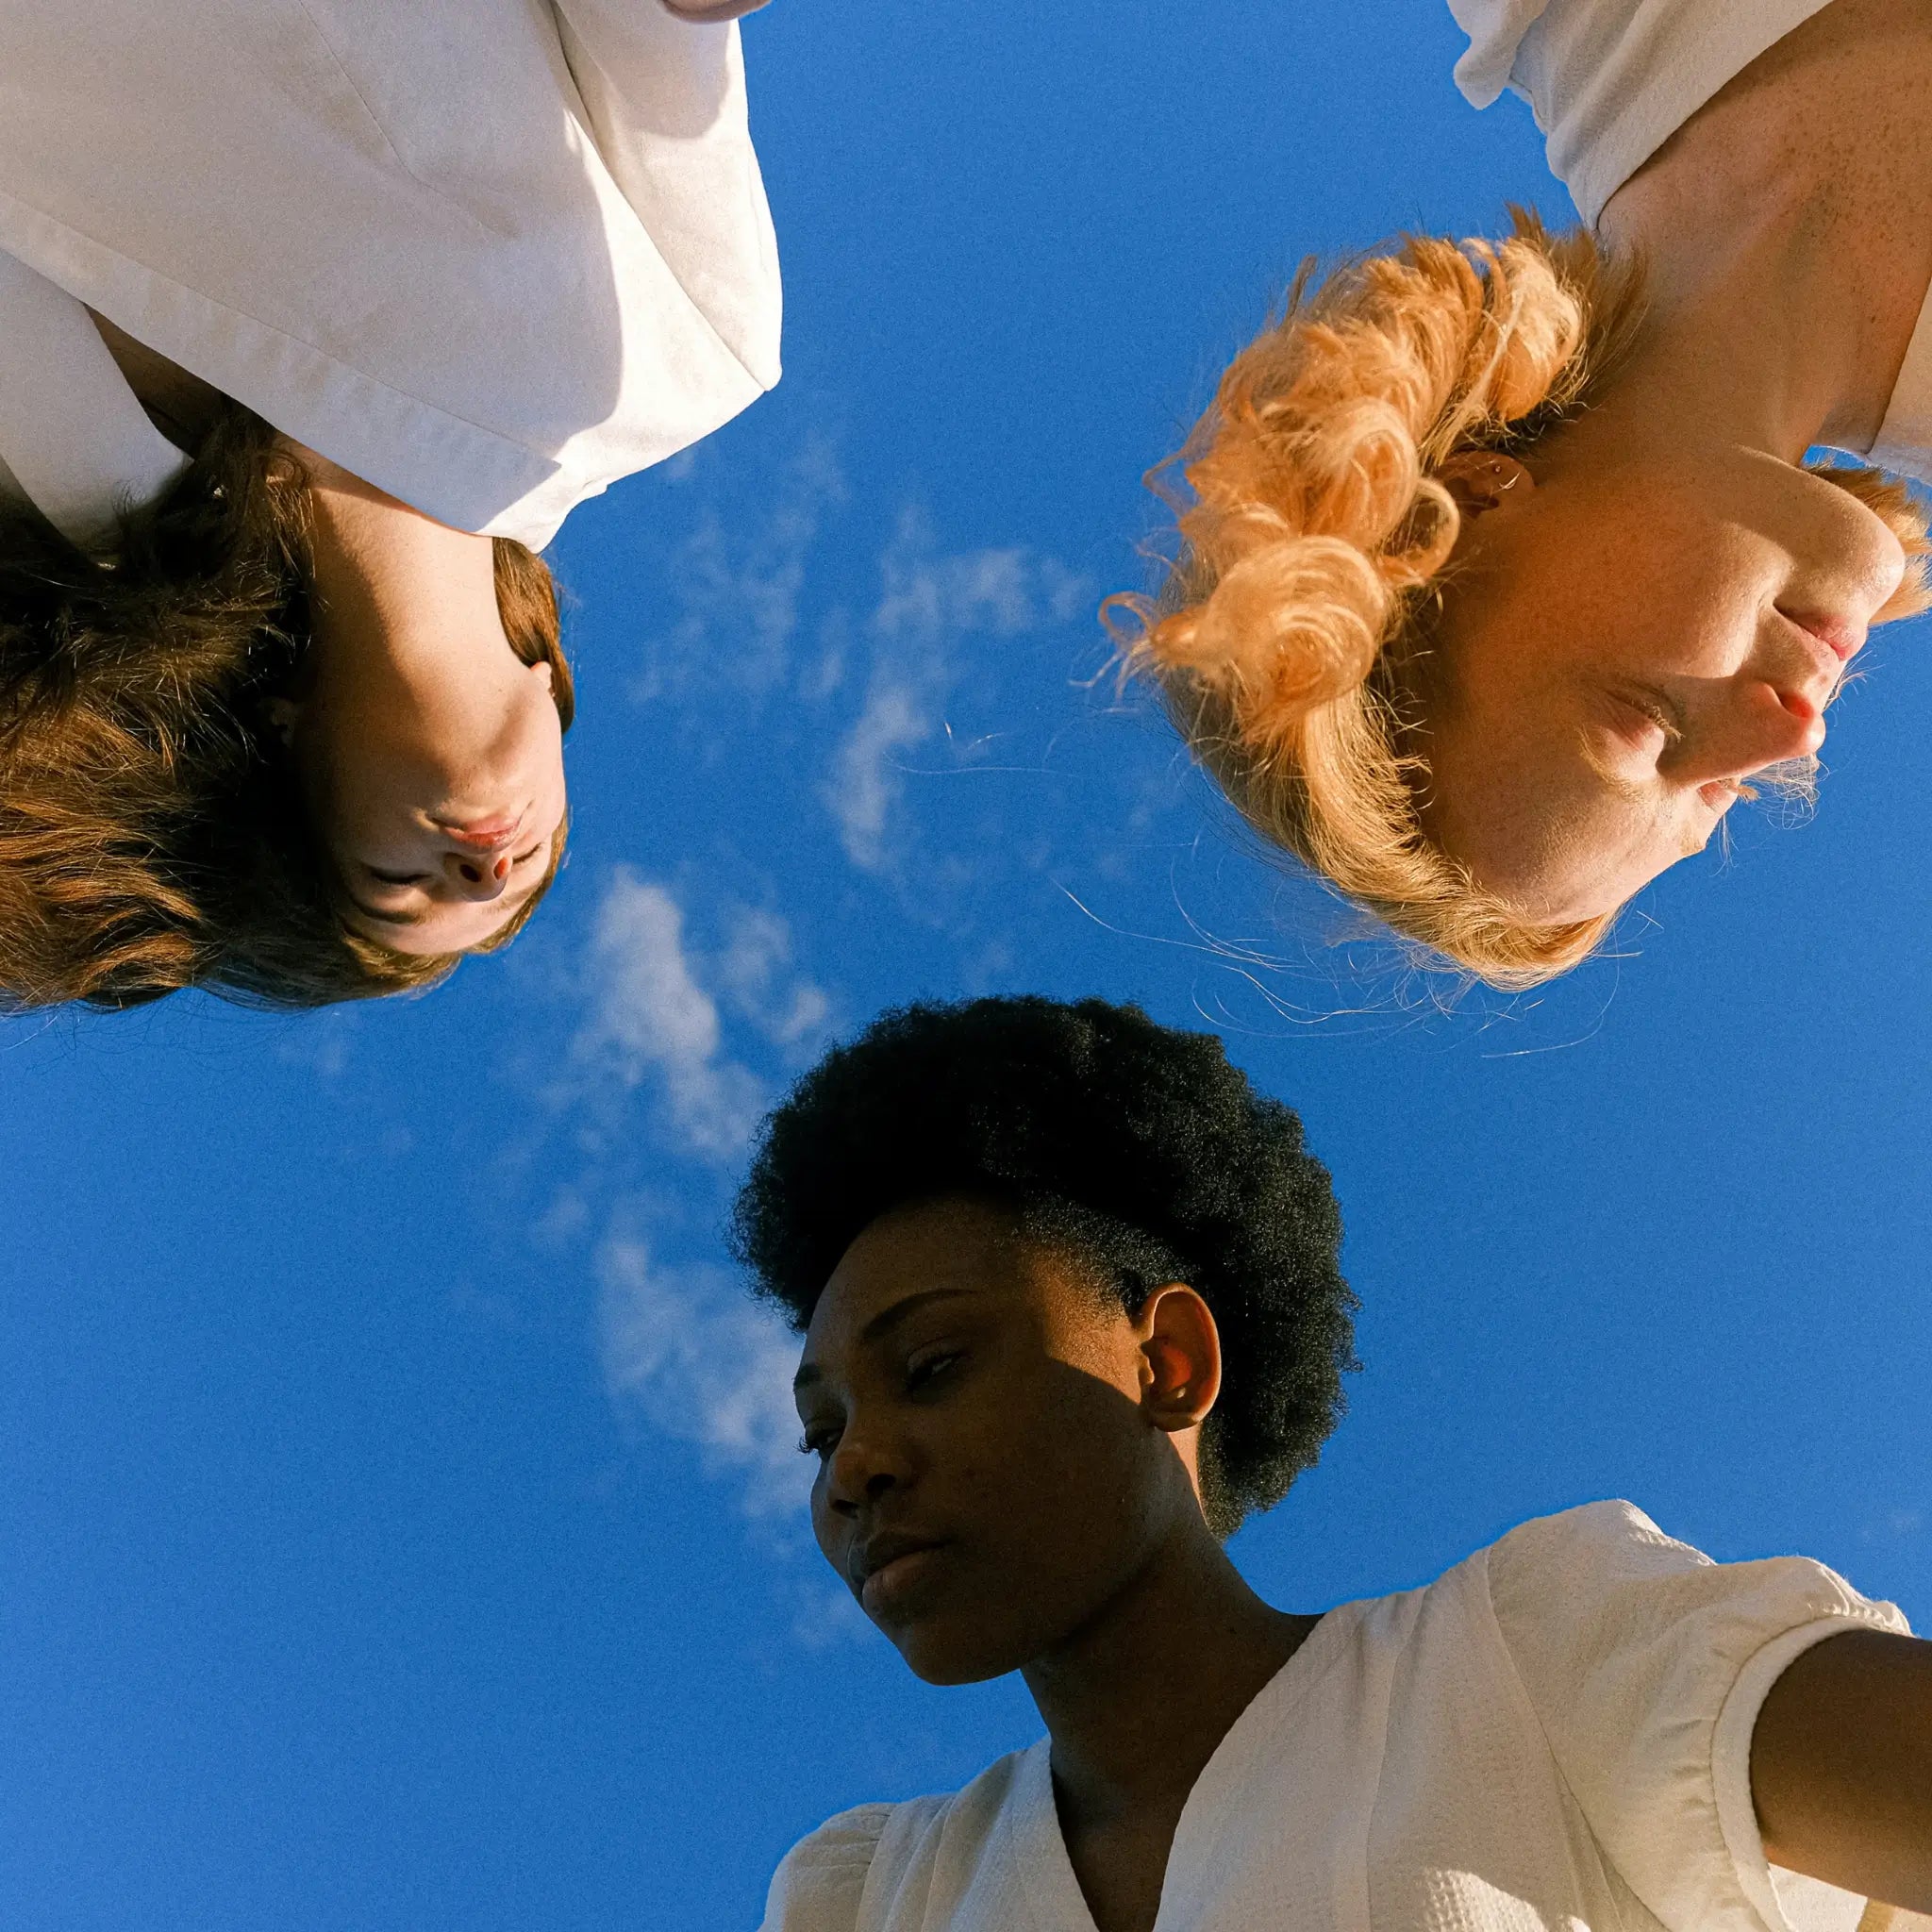 A low-angle shot of three diverse women standing against a clear blue sky, looking down into the camera, creating an empowering perspective. They are holding hands in a show of unity. The woman in the foreground has a short afro, the second has long, wavy dark hair, and the third has curly blonde hair. They all wear white, suggesting a theme of purity, peace, or solidarity.